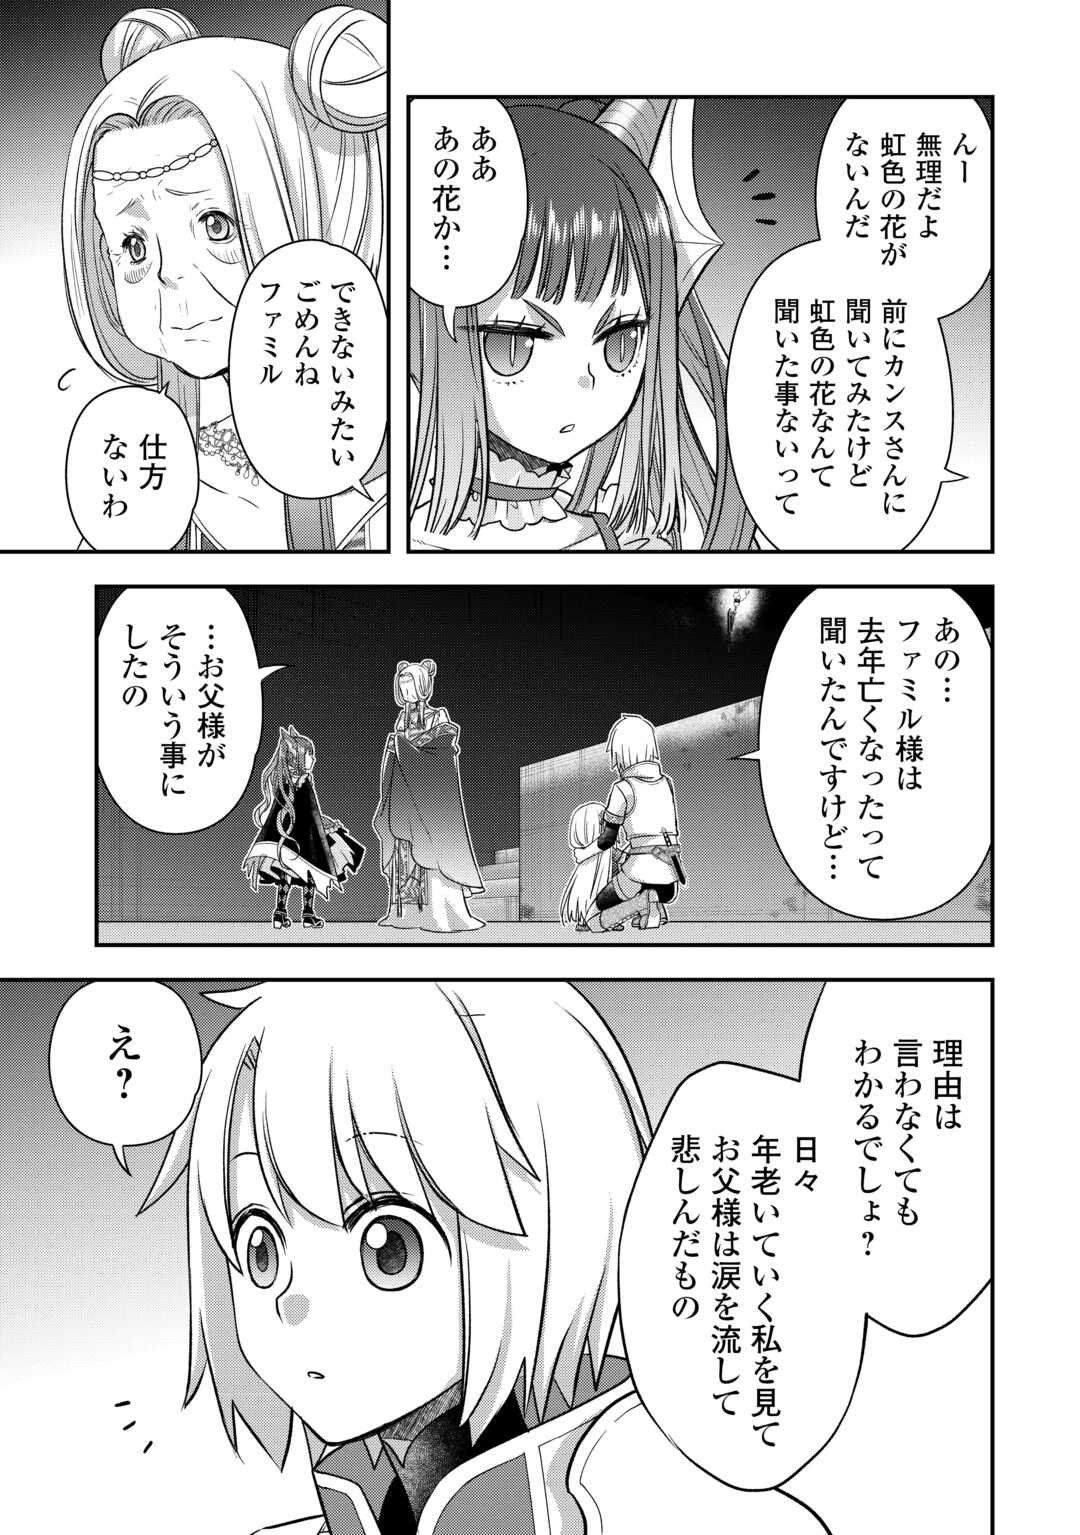 Kanchigai no Atelier Meister - Chapter 47 - Page 3